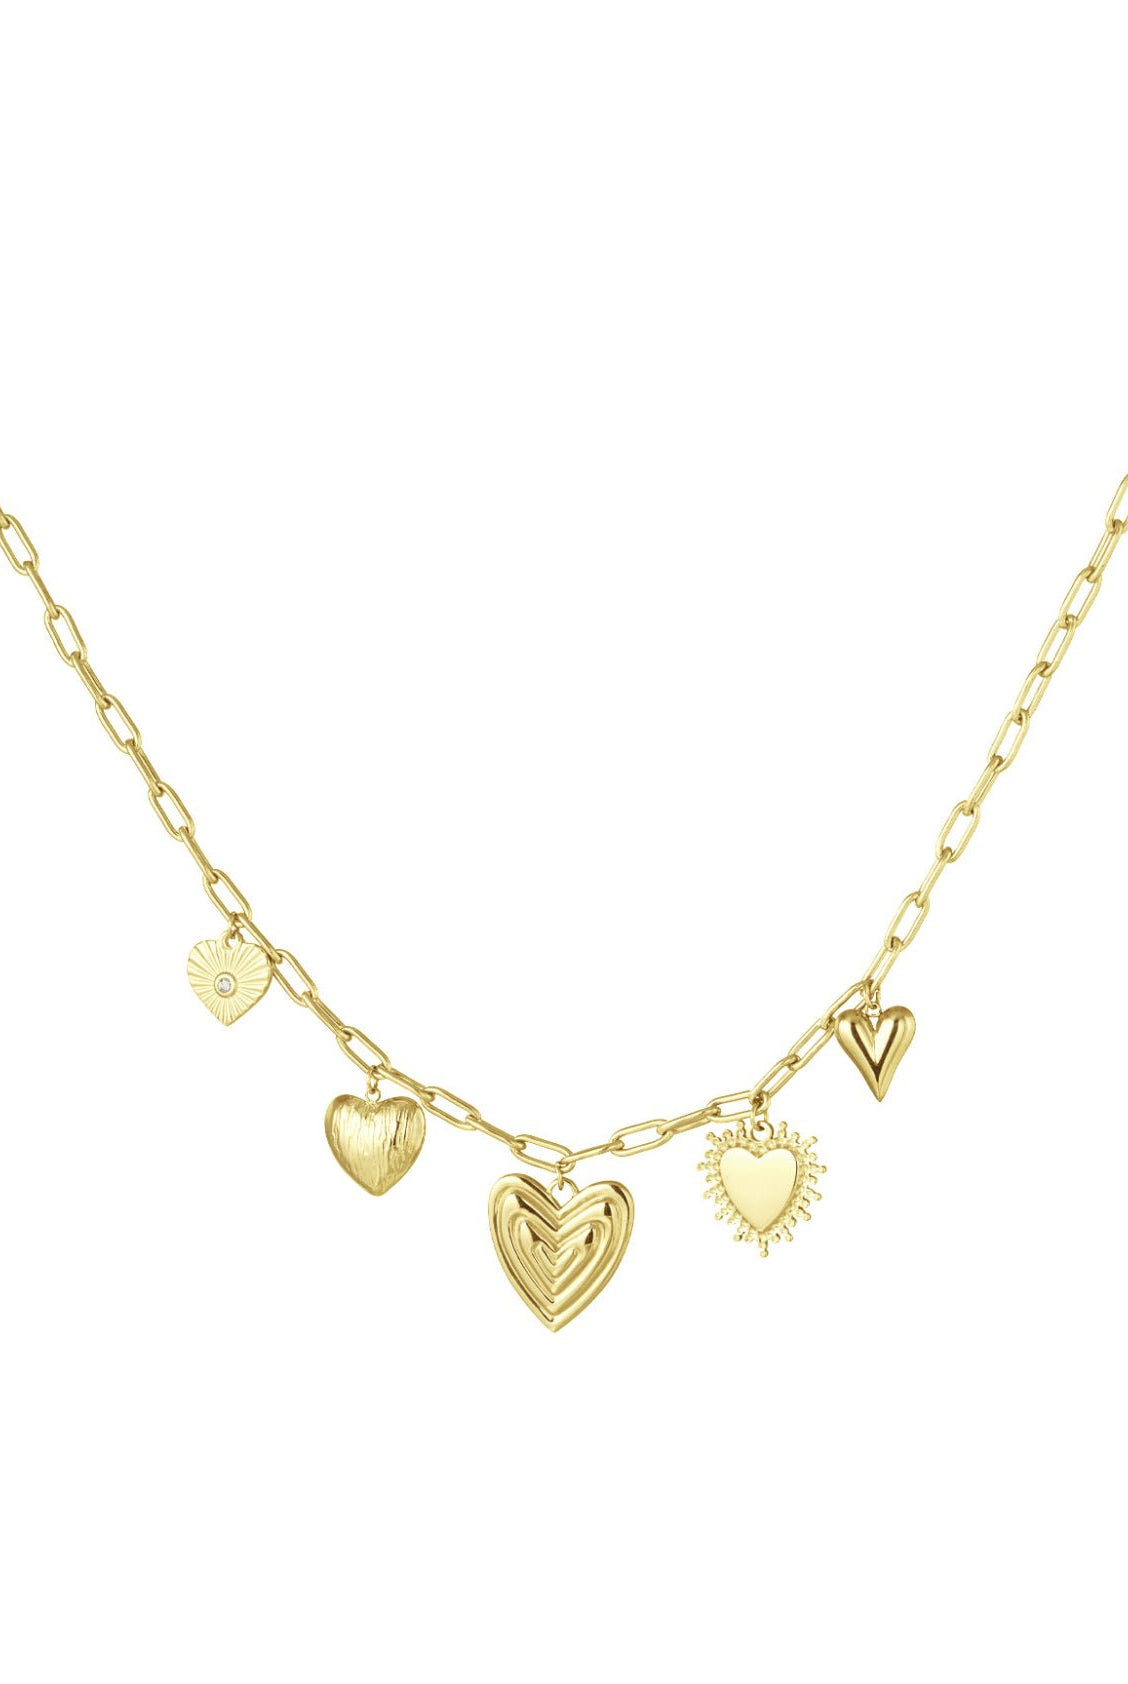 ♥︎HEARTS FOR THE WIN CHARM KETTING - My Favourites